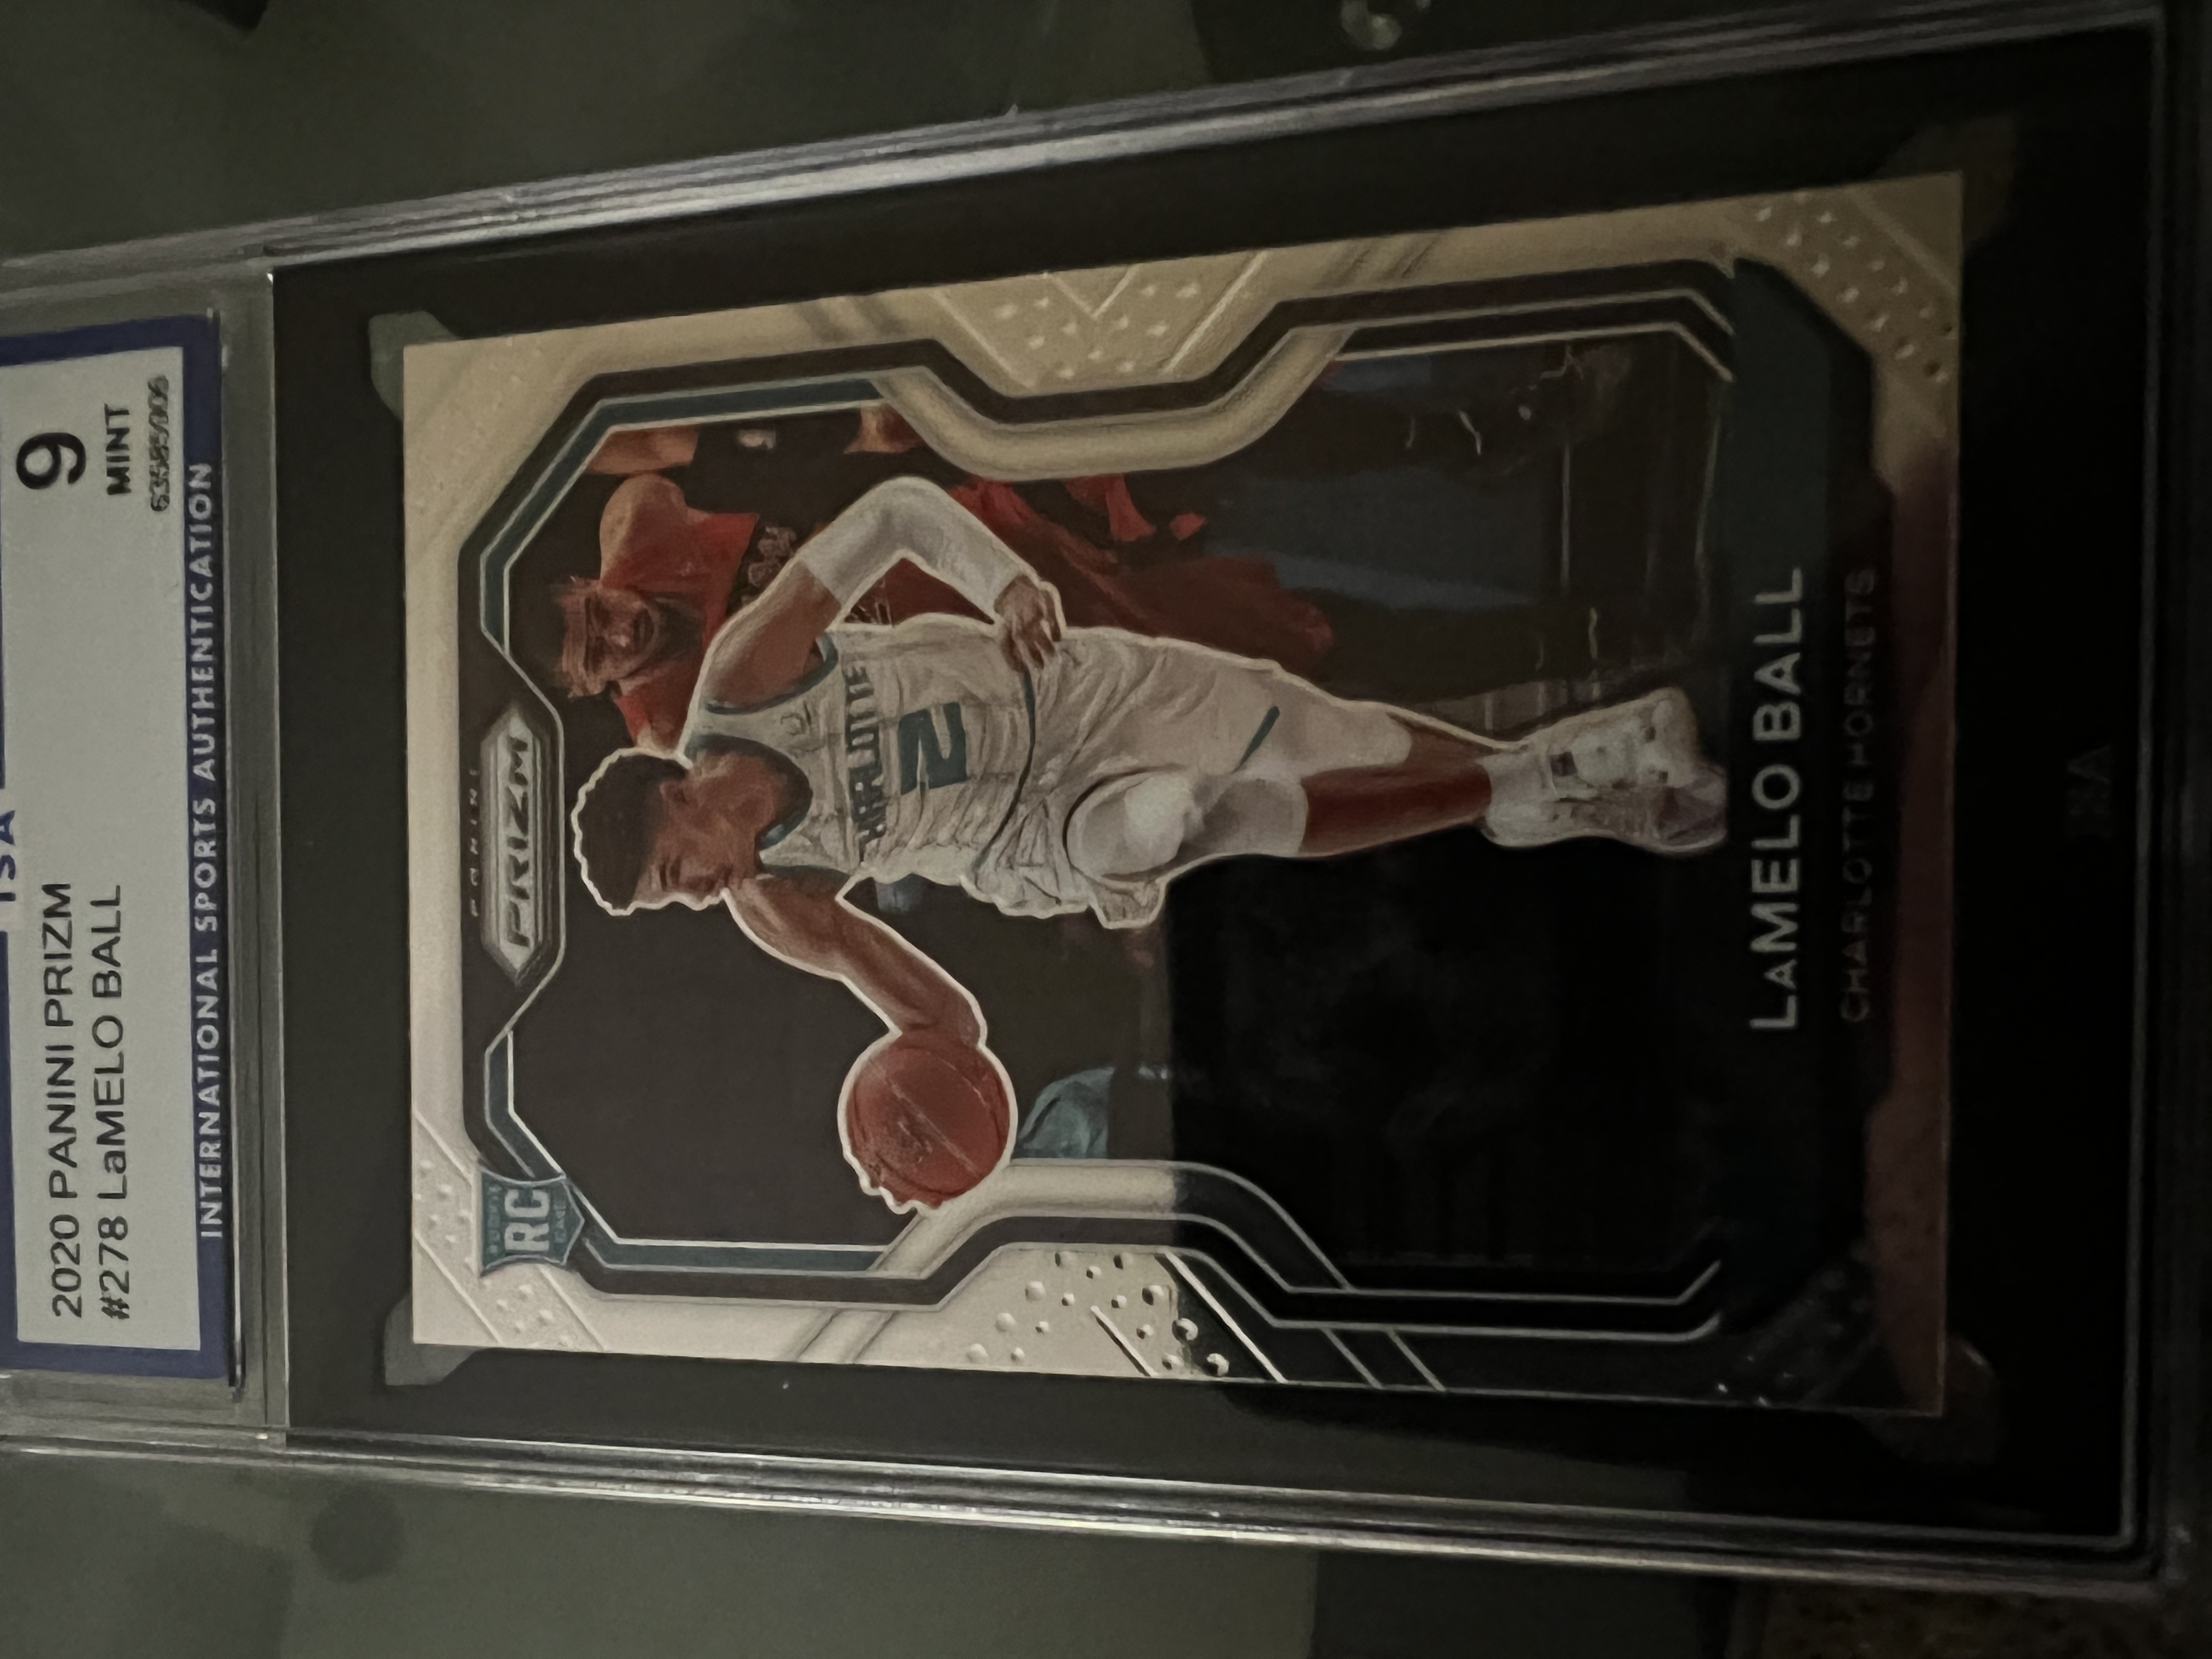 2020-21 Prizm Lamelo Ball RC ISA 9